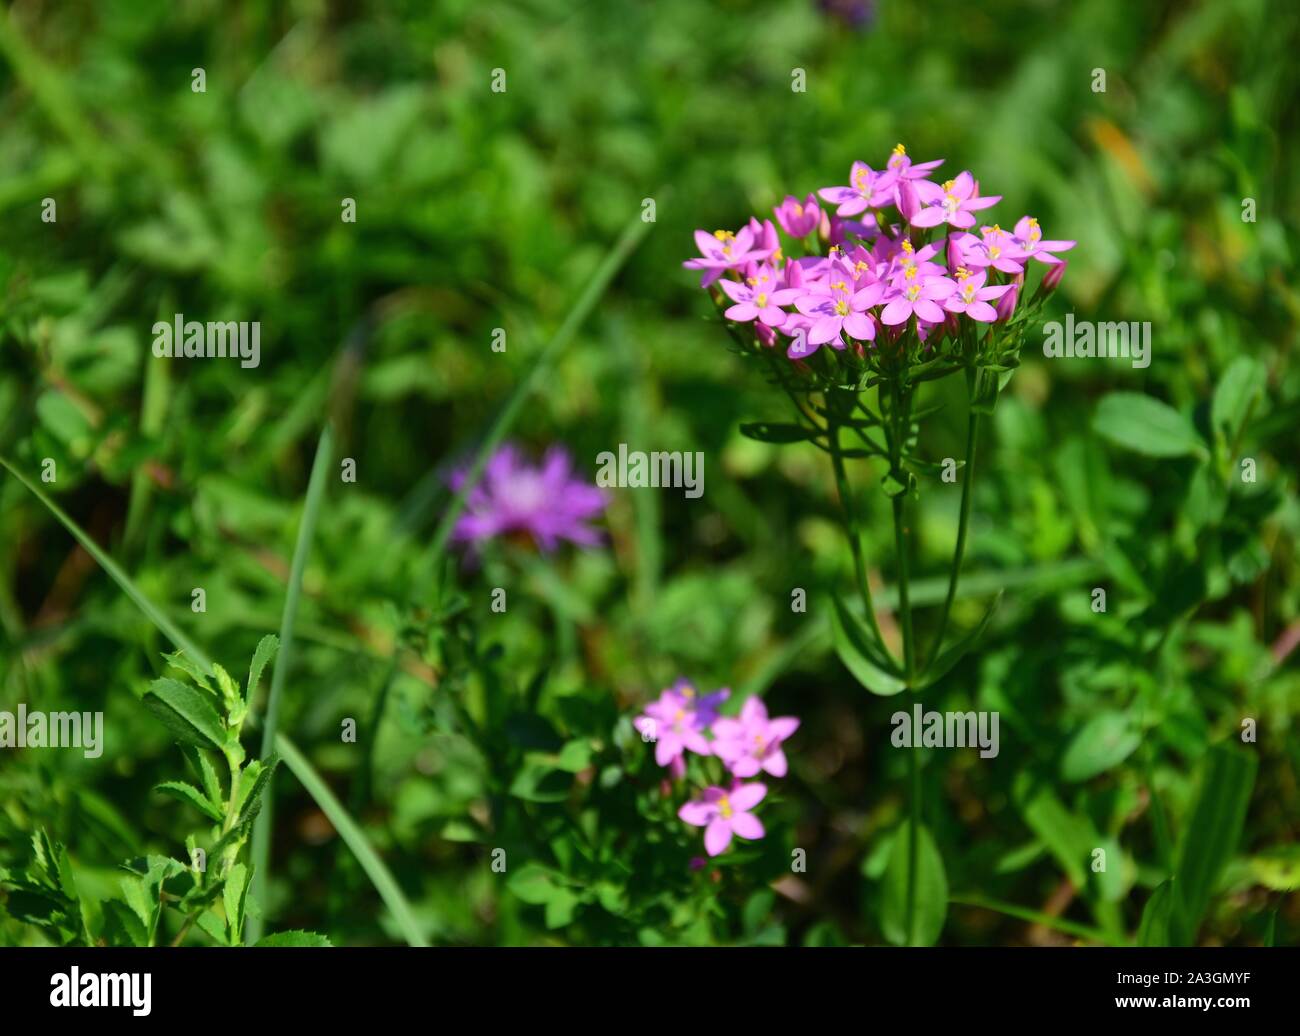 Centaurium erythraea is a species of flowering plant in the gentian family known by the common names common centaury and European centaury. Horizontal Stock Photo